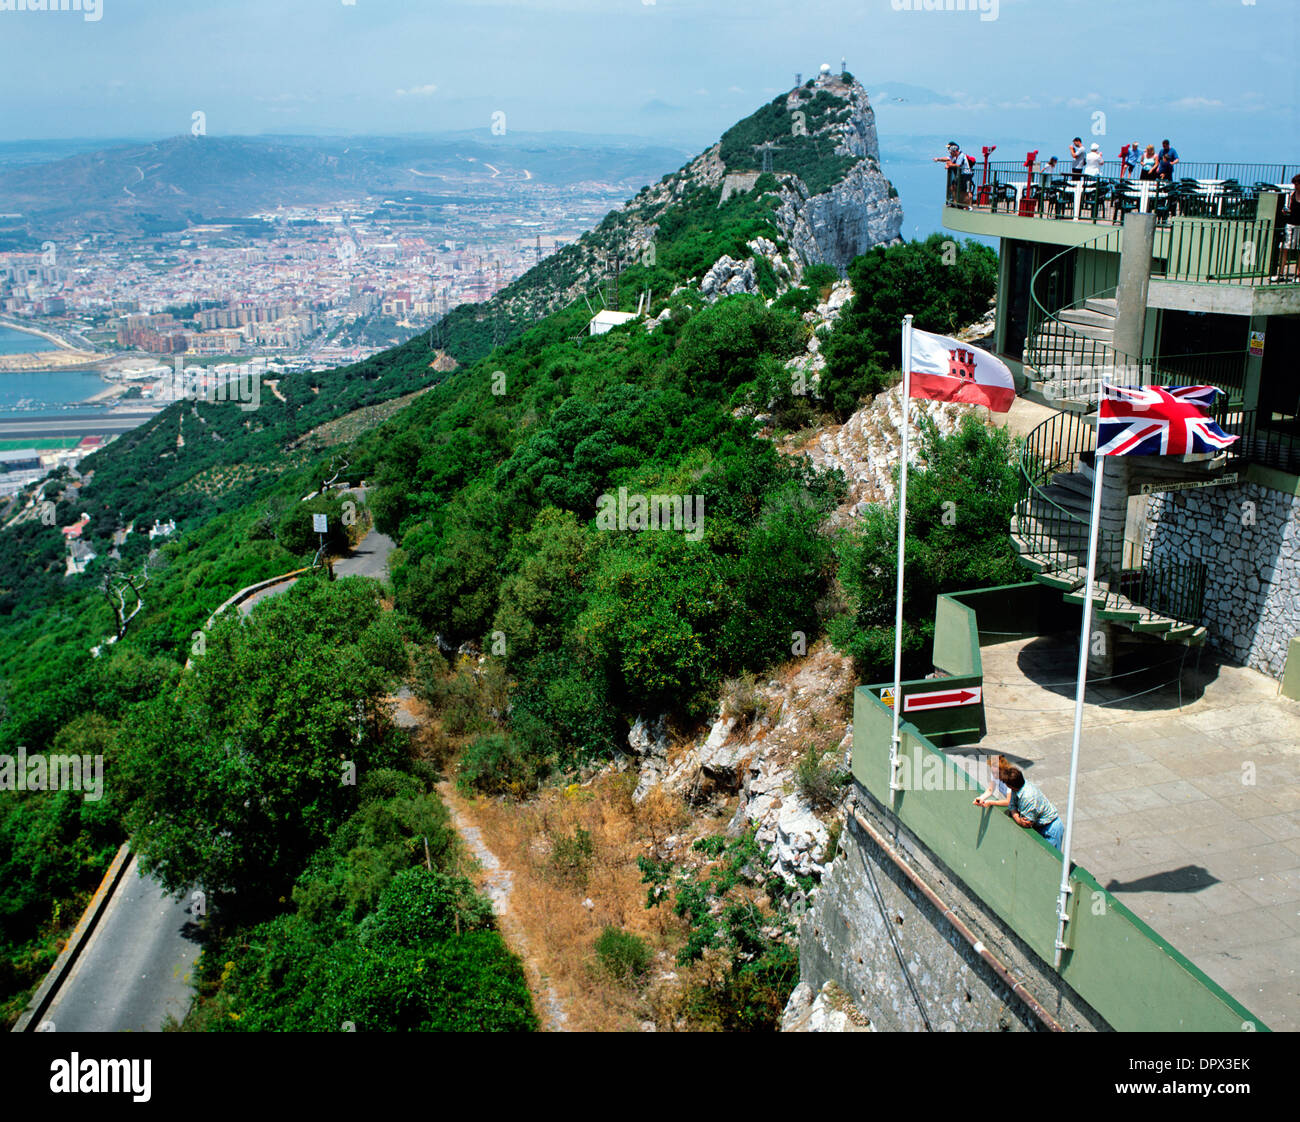 Aerial view of Gibraltar as seen from the top of the Rock of Gibraltar, Spain Stock Photo